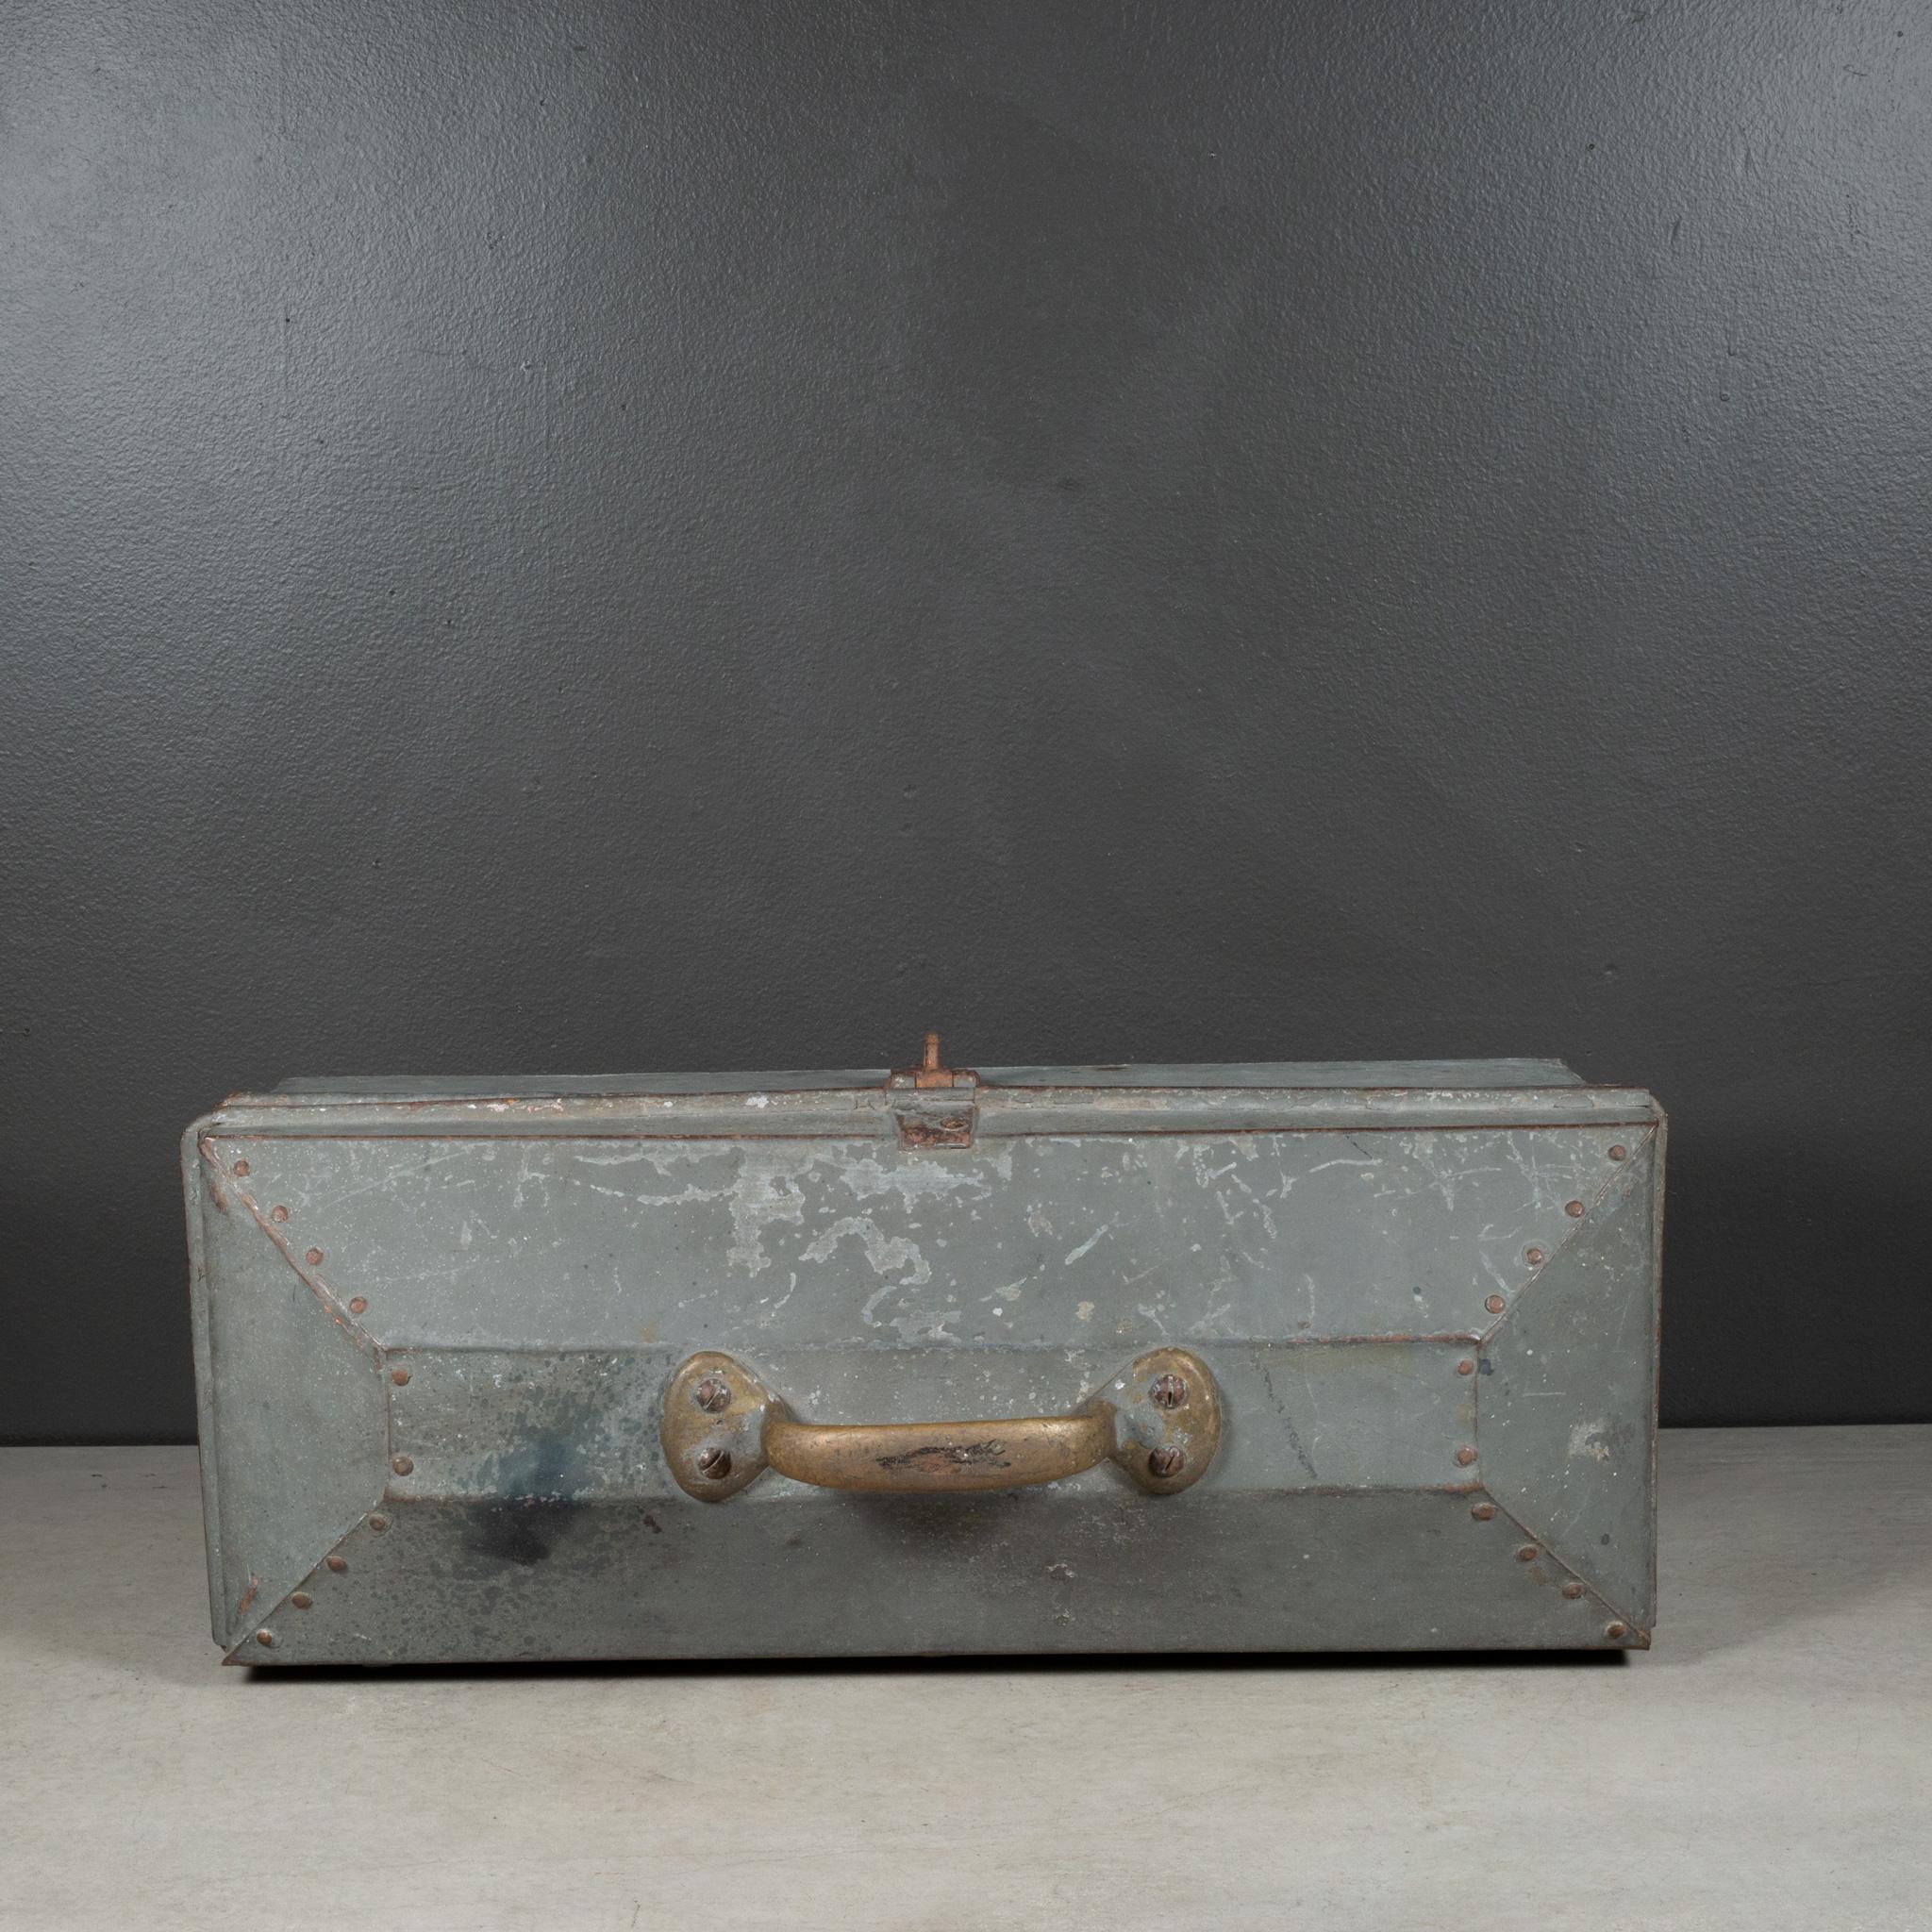 Metal Early 20th c. Factory Toolbox with Solid Bronze Handle c.1930-1940 For Sale